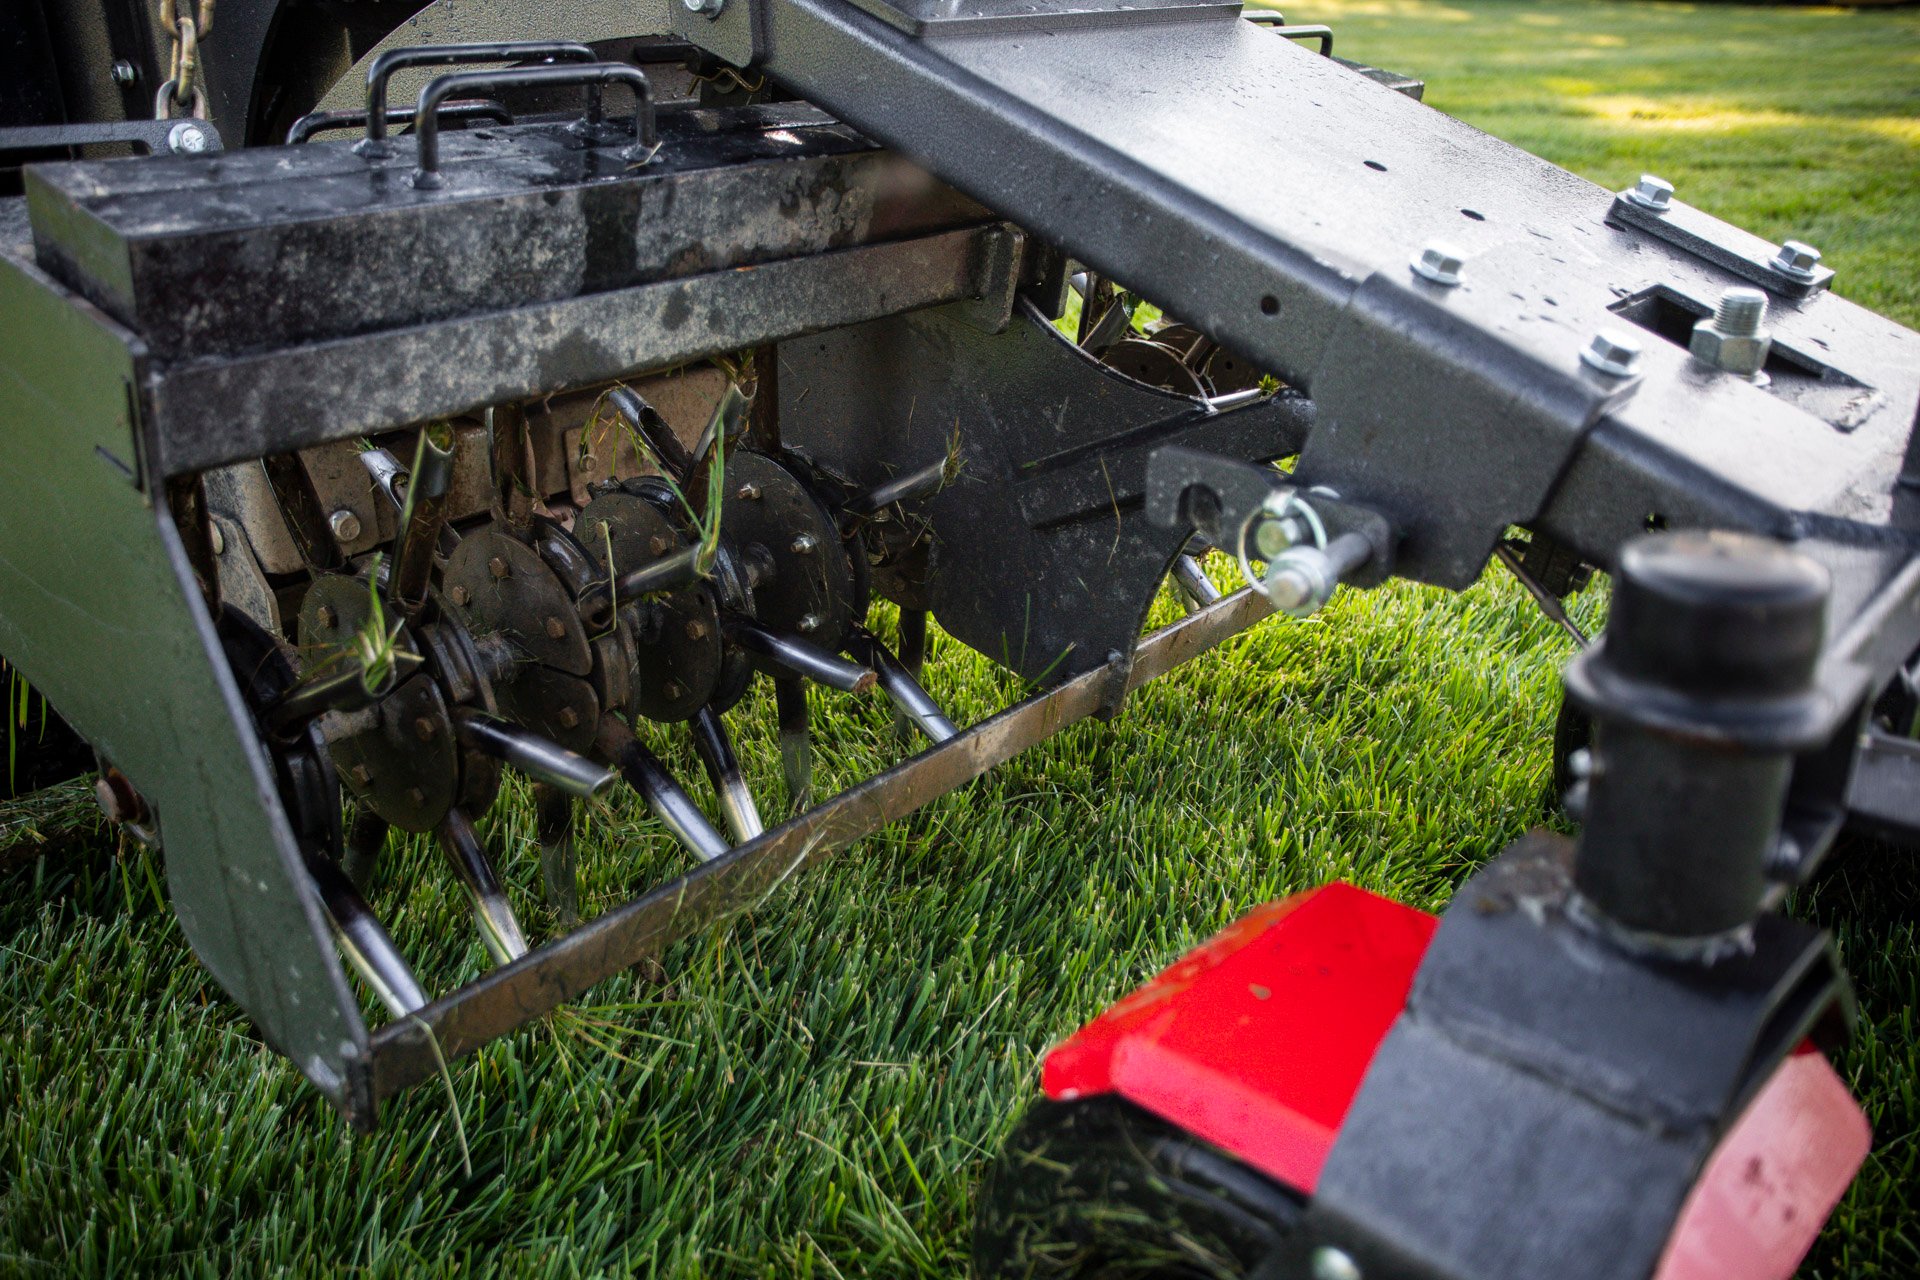 lawn aerator machine pulling soil plugs out of a grass yard